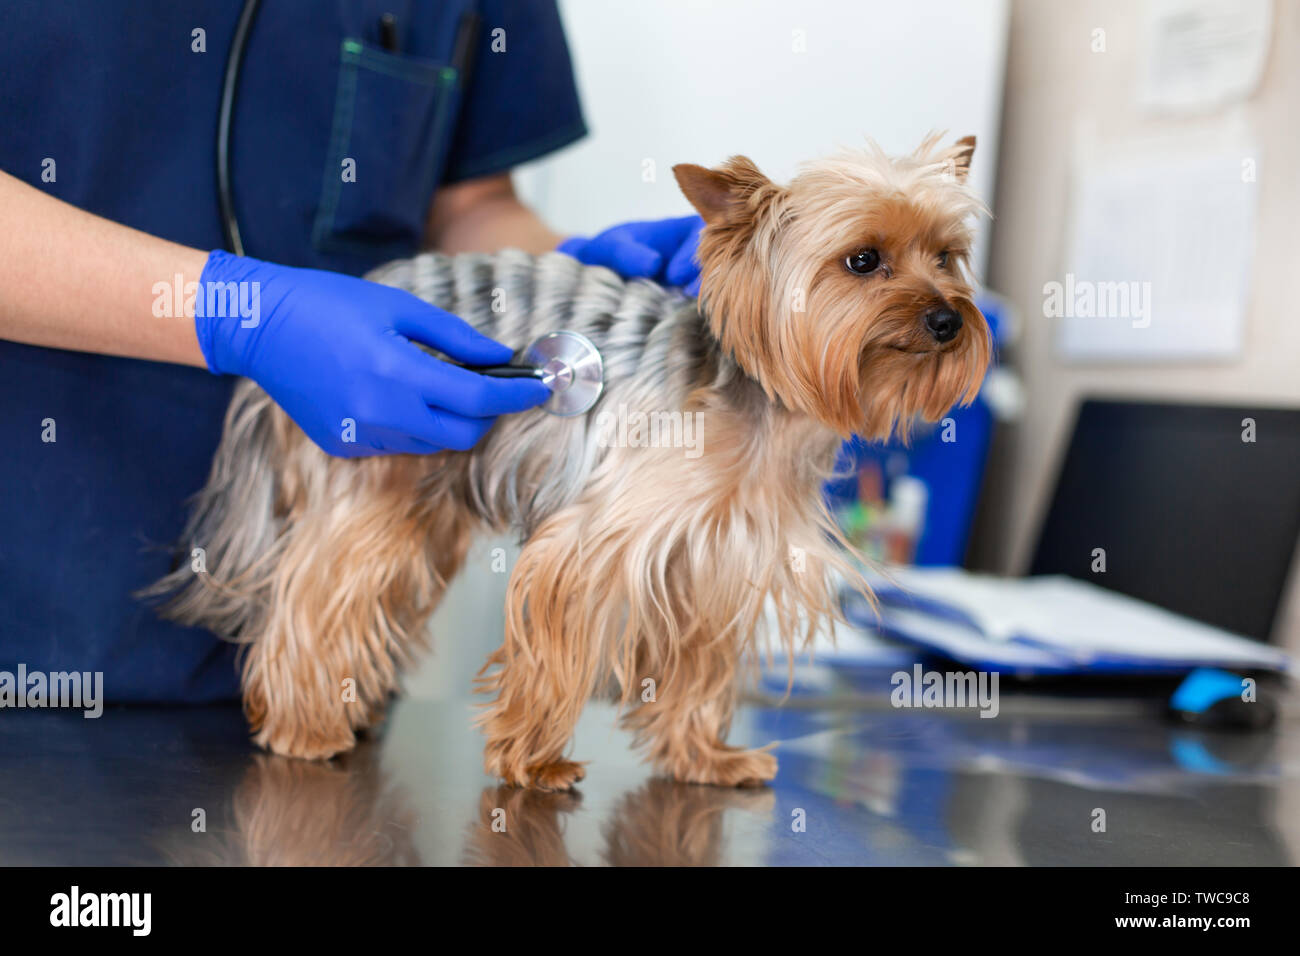 Professional vet doctor examines a small dog breed Yorkshire Terrier using a stethoscope. A young male veterinarian of Caucasian appearance works in a Stock Photo